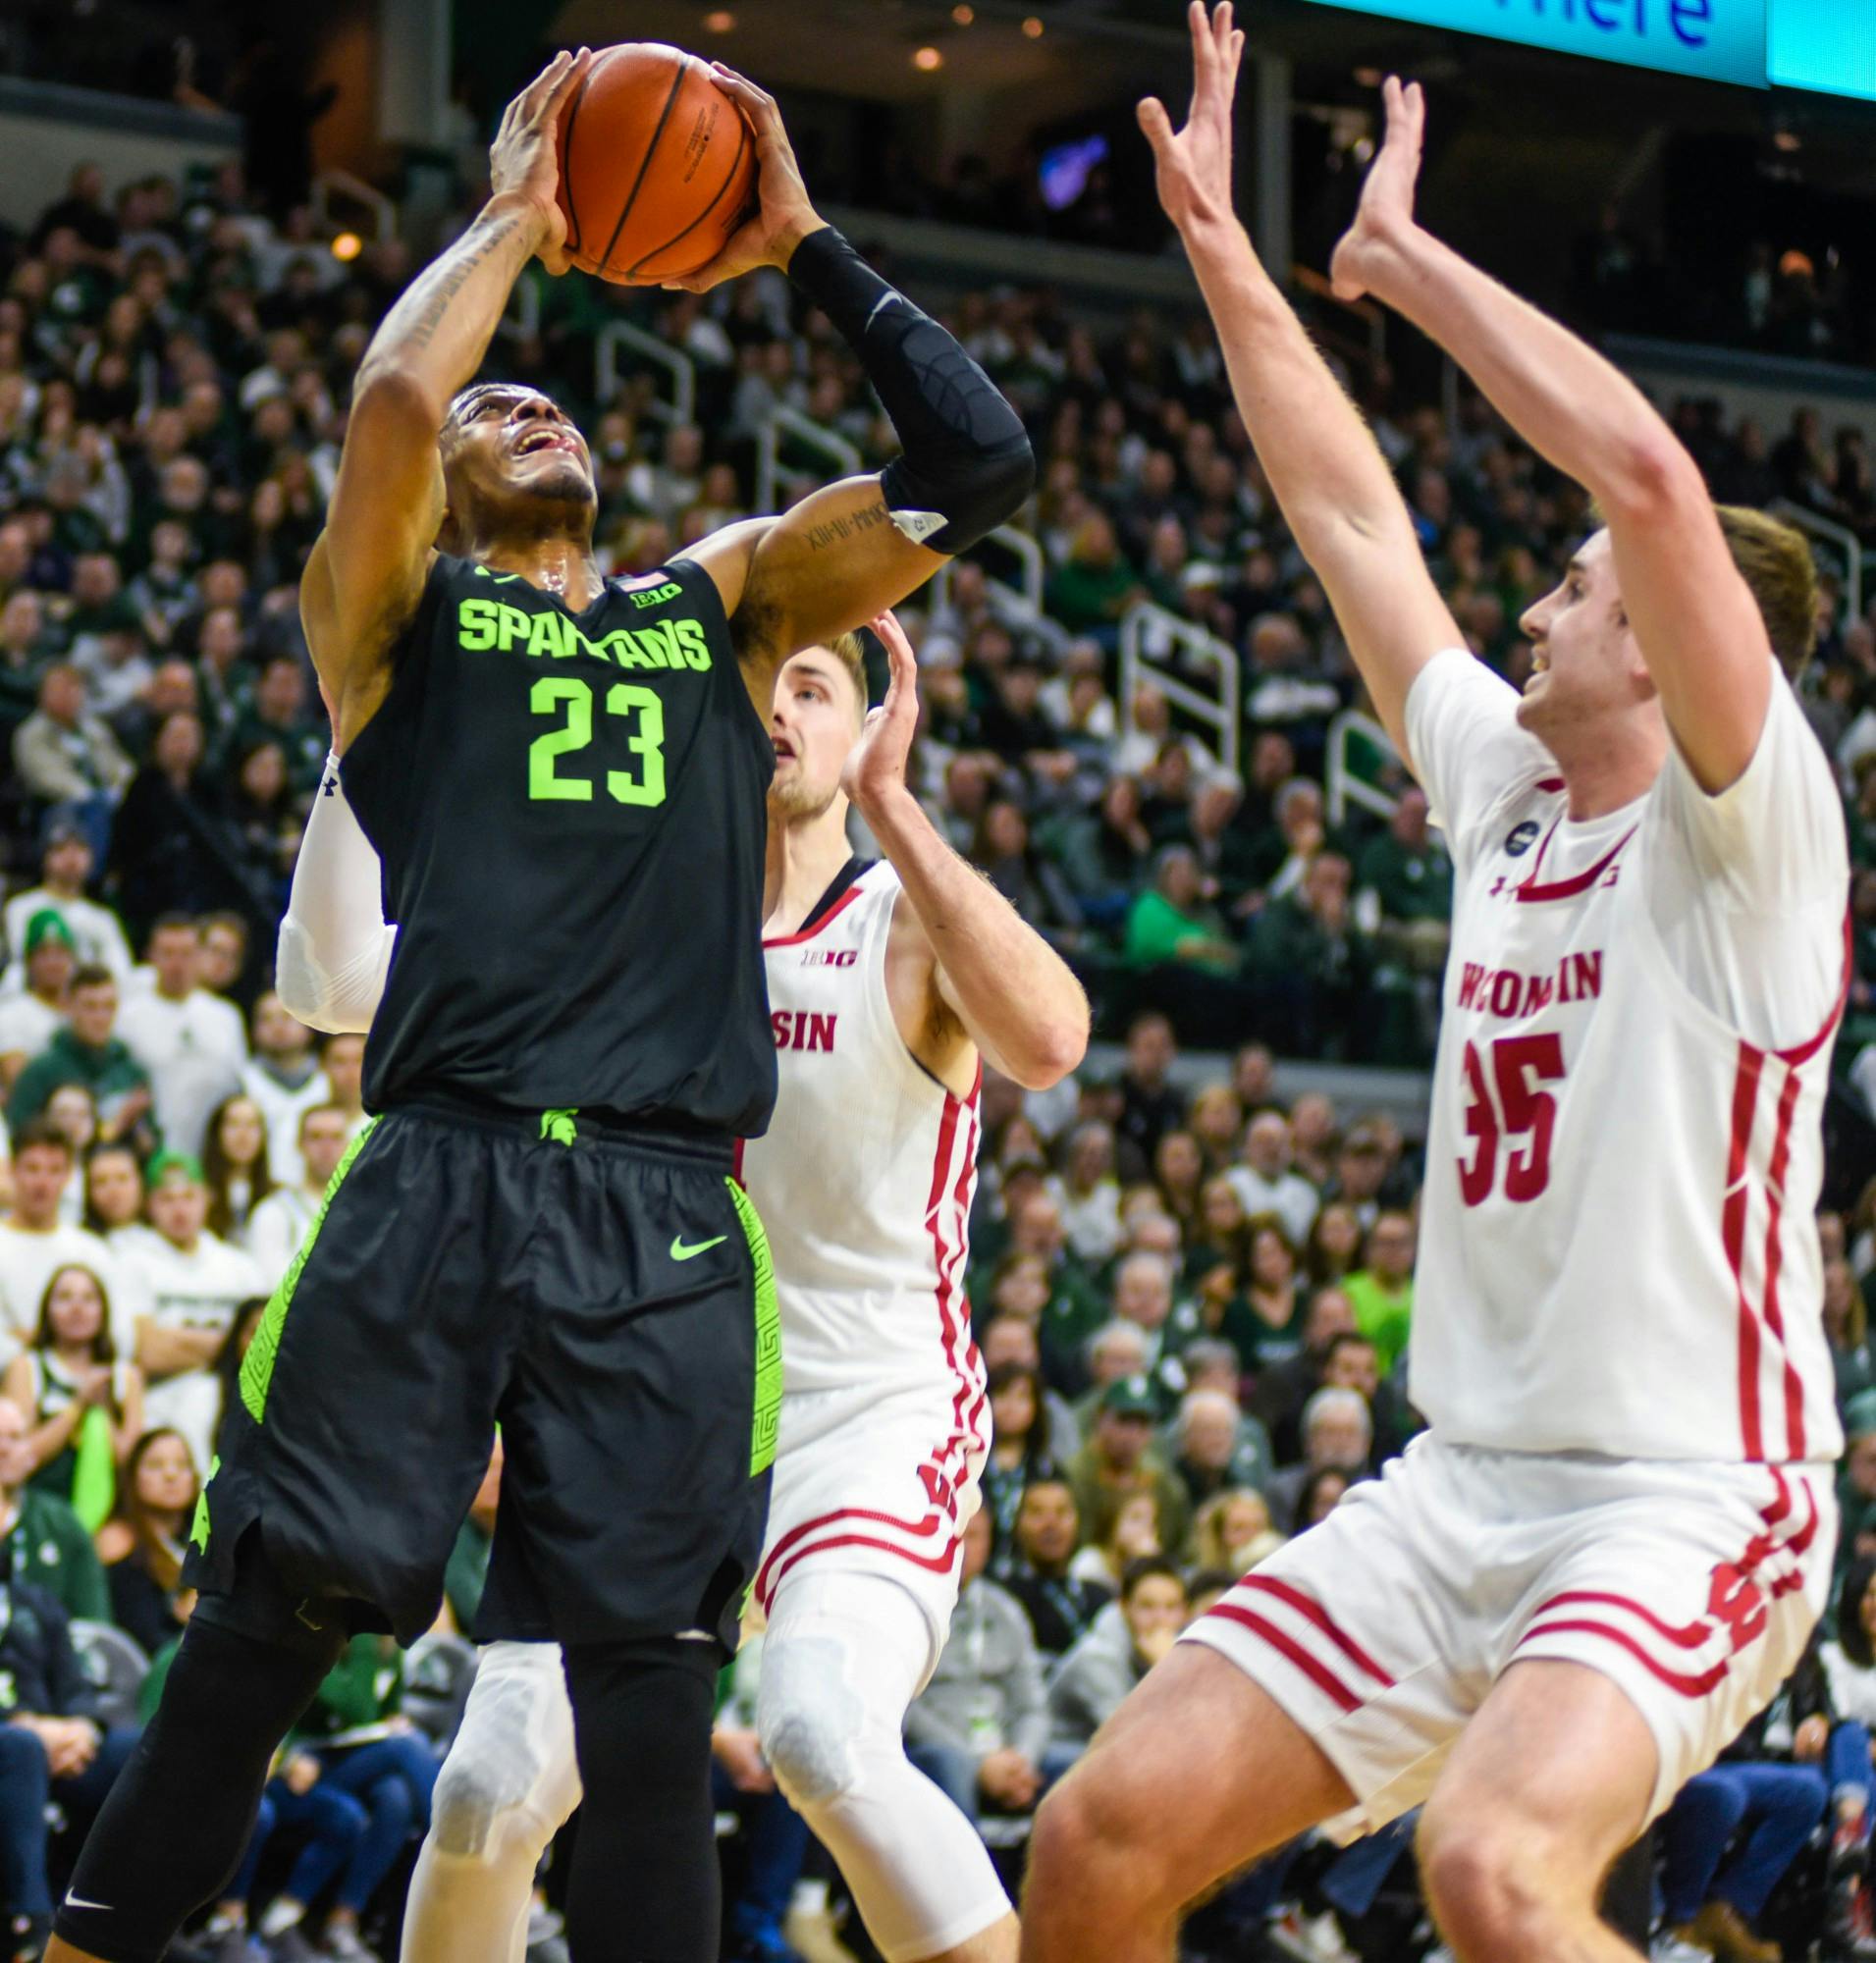 <p>Junior forward Xavier Tillman (23) shoots the ball during the game against Wisconsin on Jan. 17, 2020 at Breslin Center. The Spartans lead the Badgers at the half, 35-20.</p>